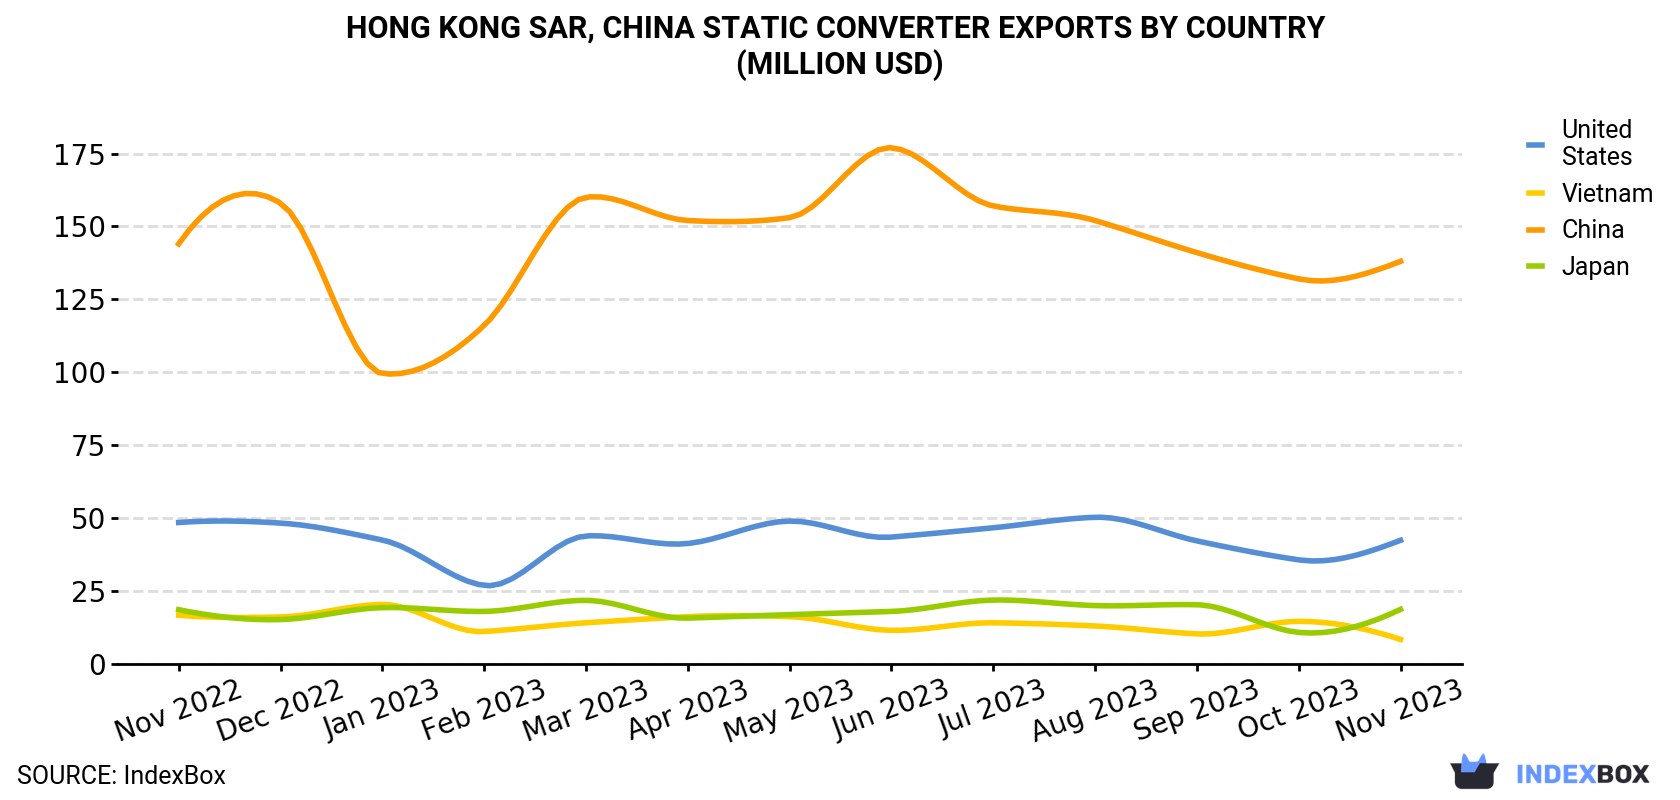 Hong Kong Static Converter Exports By Country (Million USD)